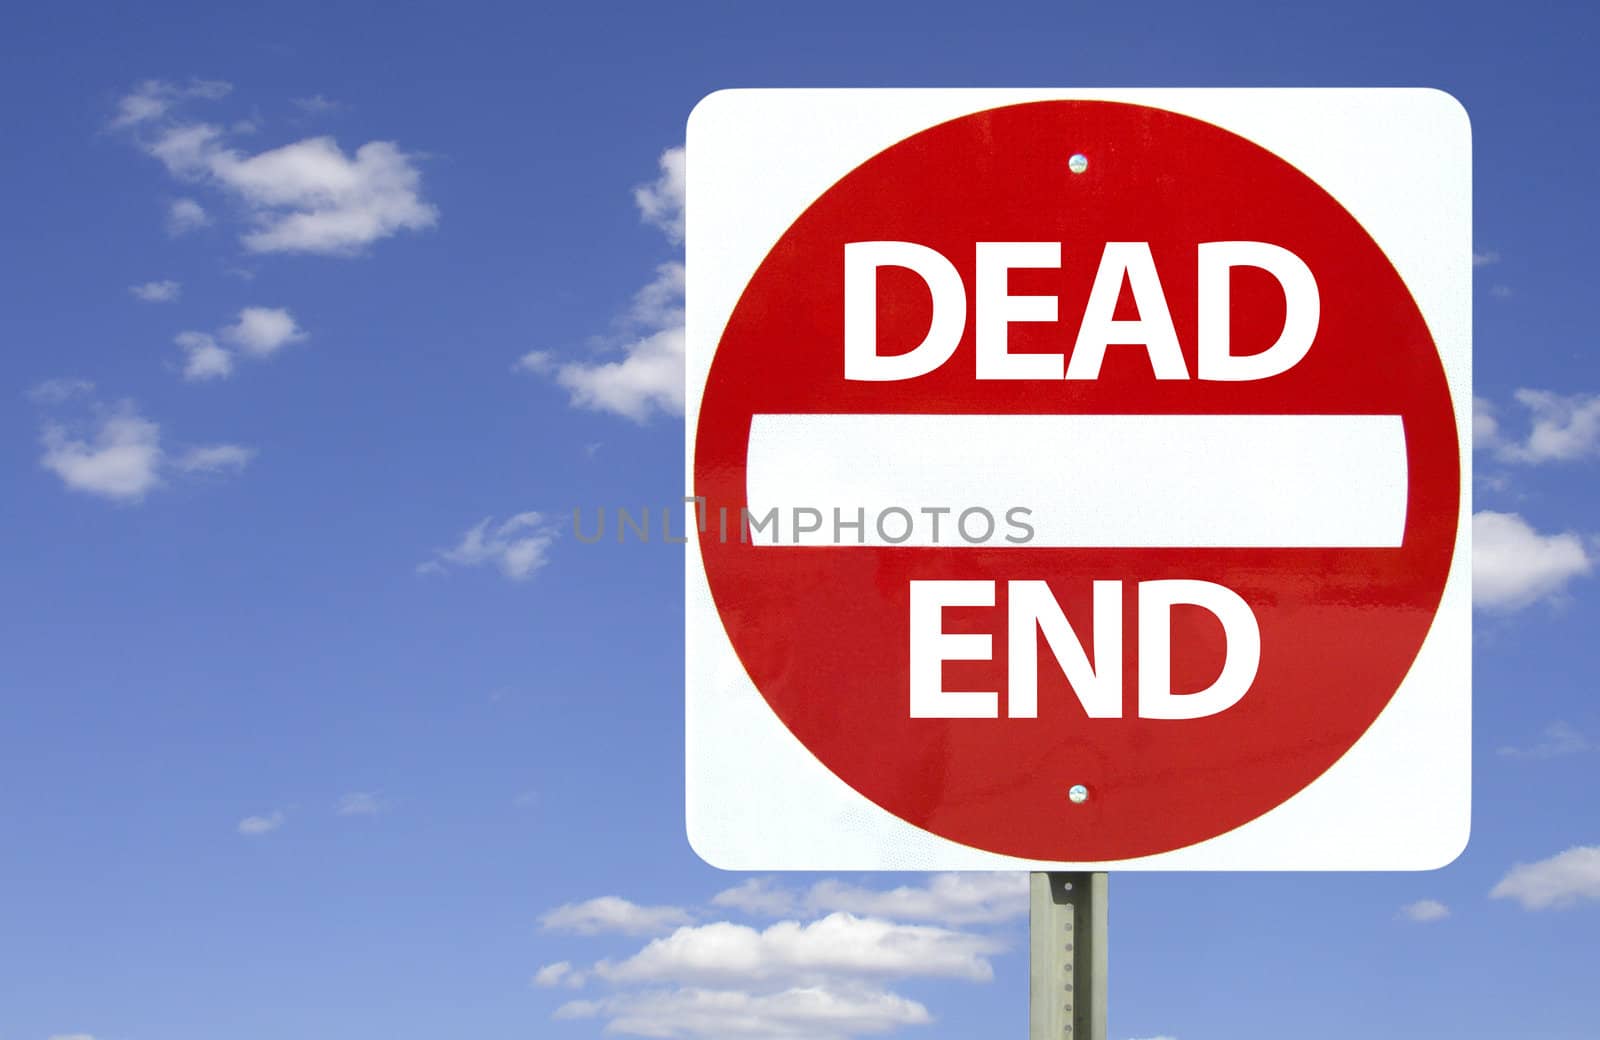 Dead end sign on blue sky, isolated